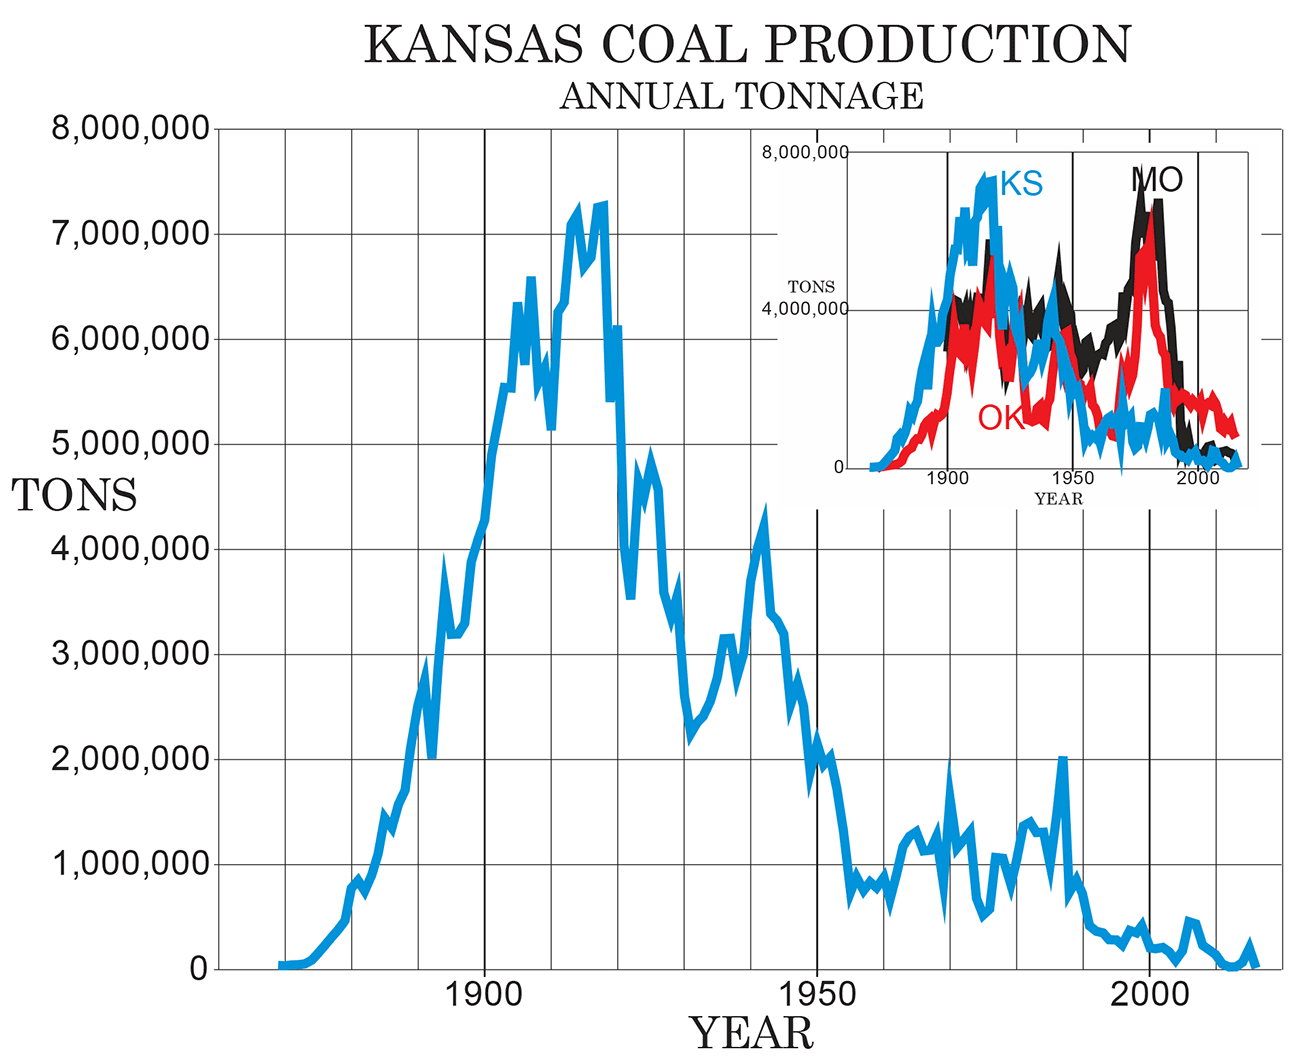 Annual coal production in Kansas and inset showing simultaneous production from adjacent states.